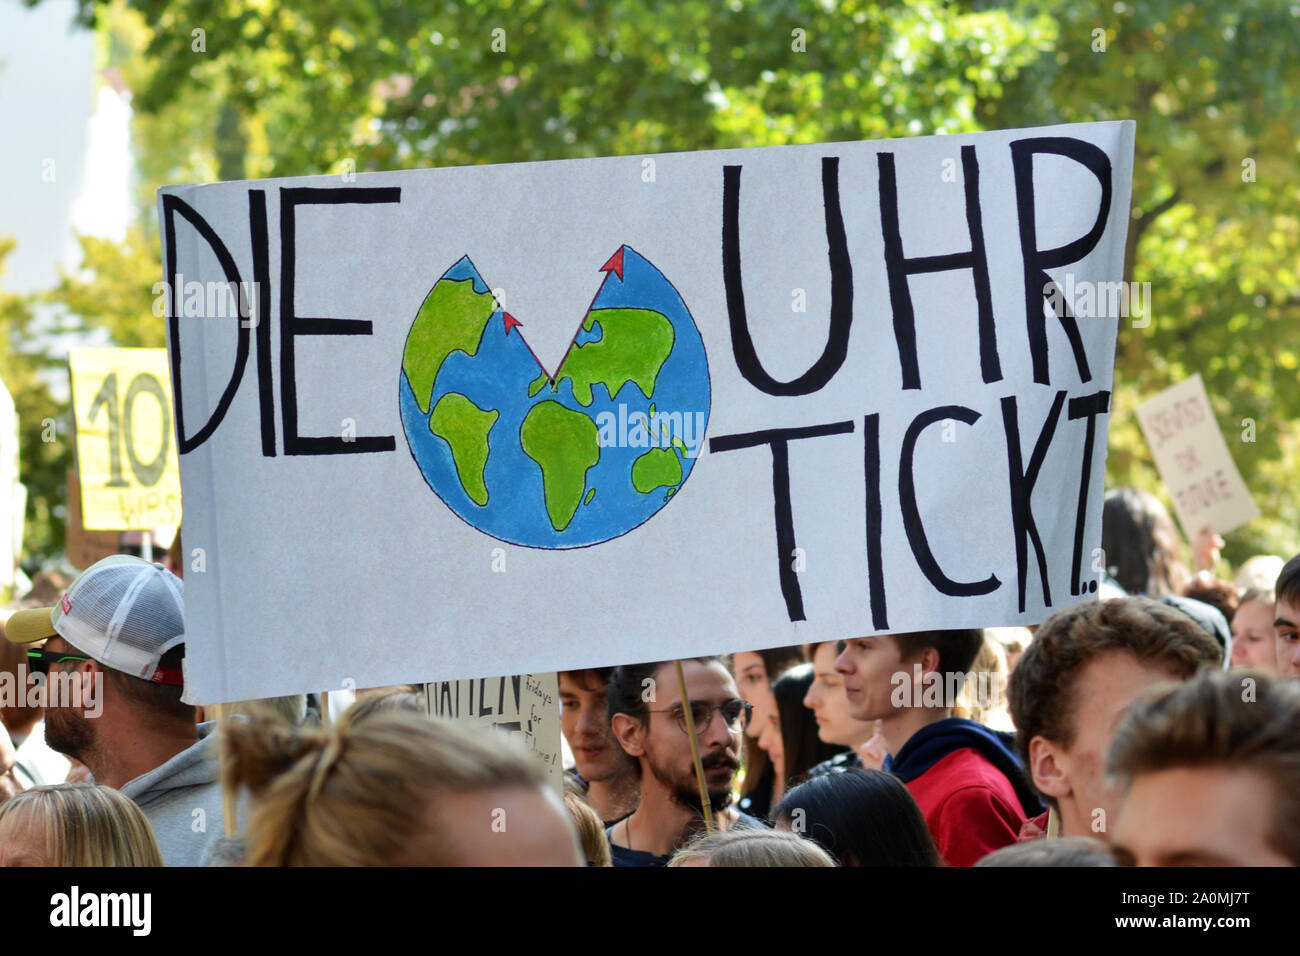 Protest sign saying 'Time is ticking' in German held up by young people during Global Climate Strike Stock Photo